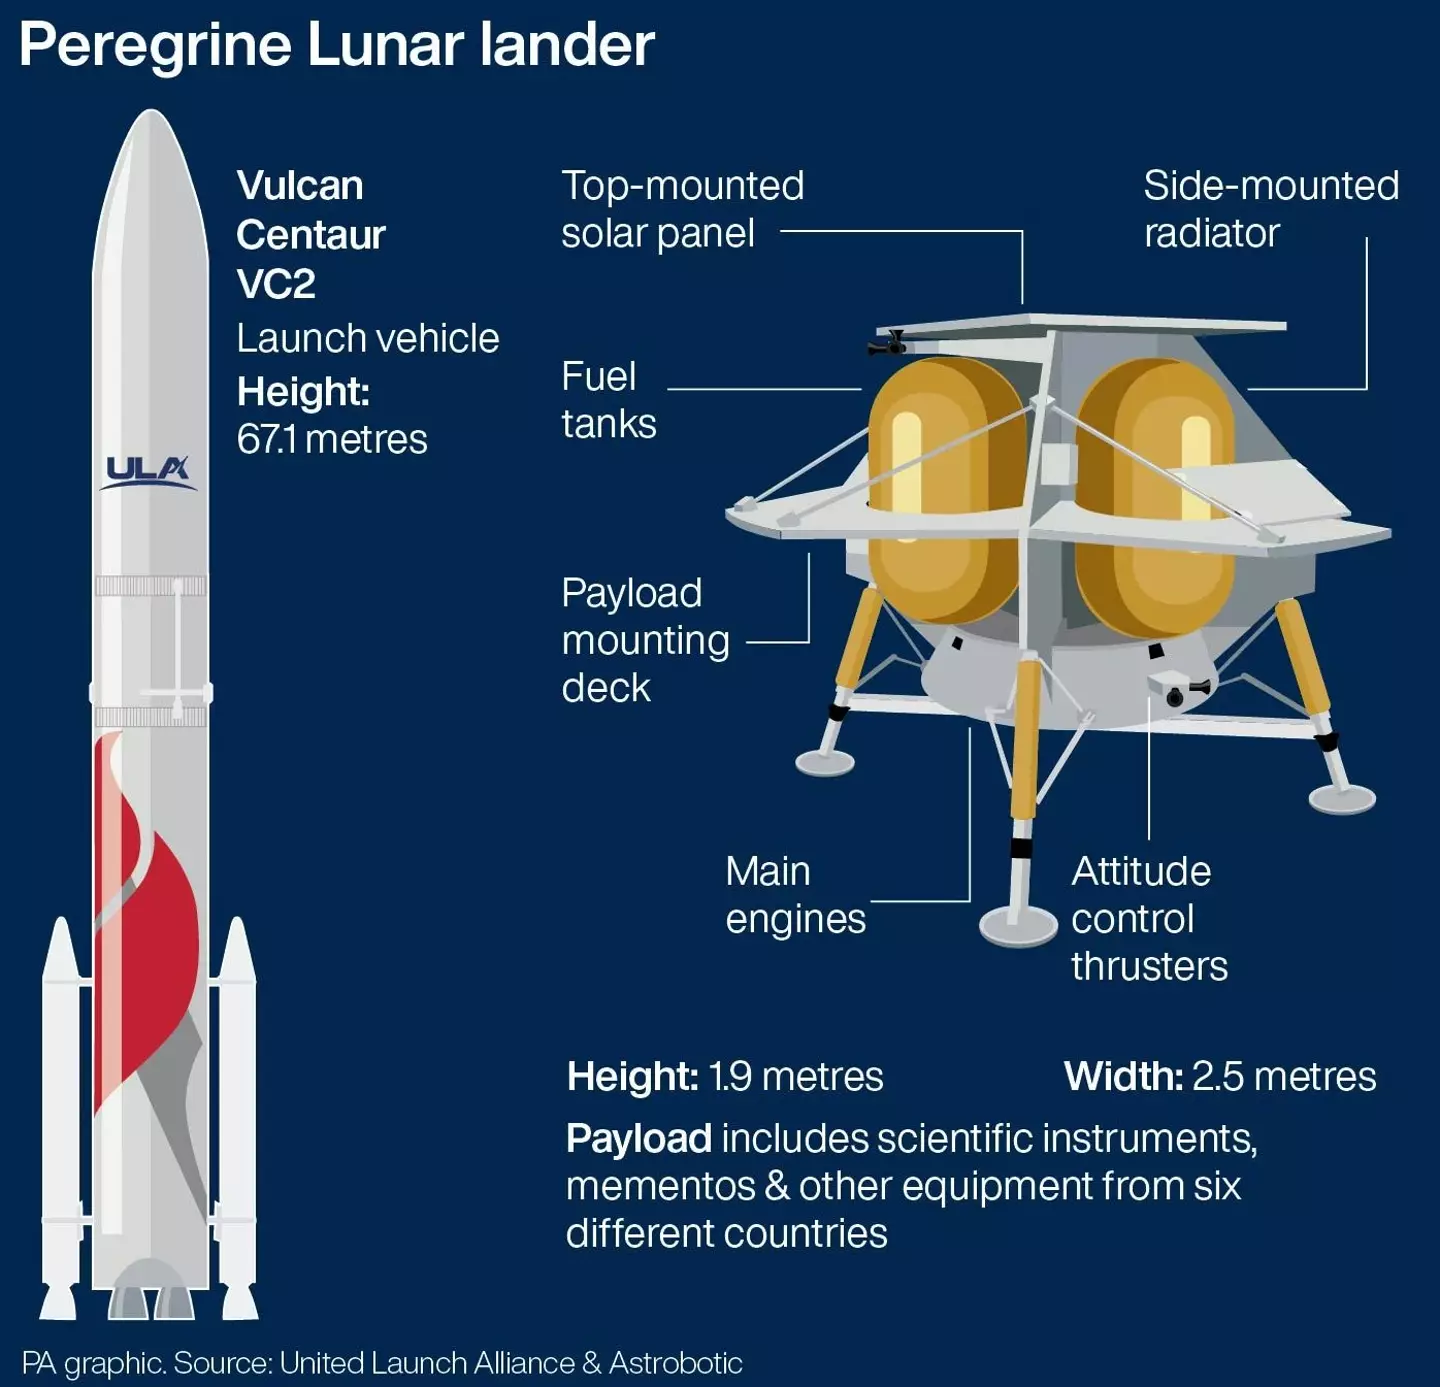 The Peregrine lunar lander even carries a chip of rock from Mount Everest.